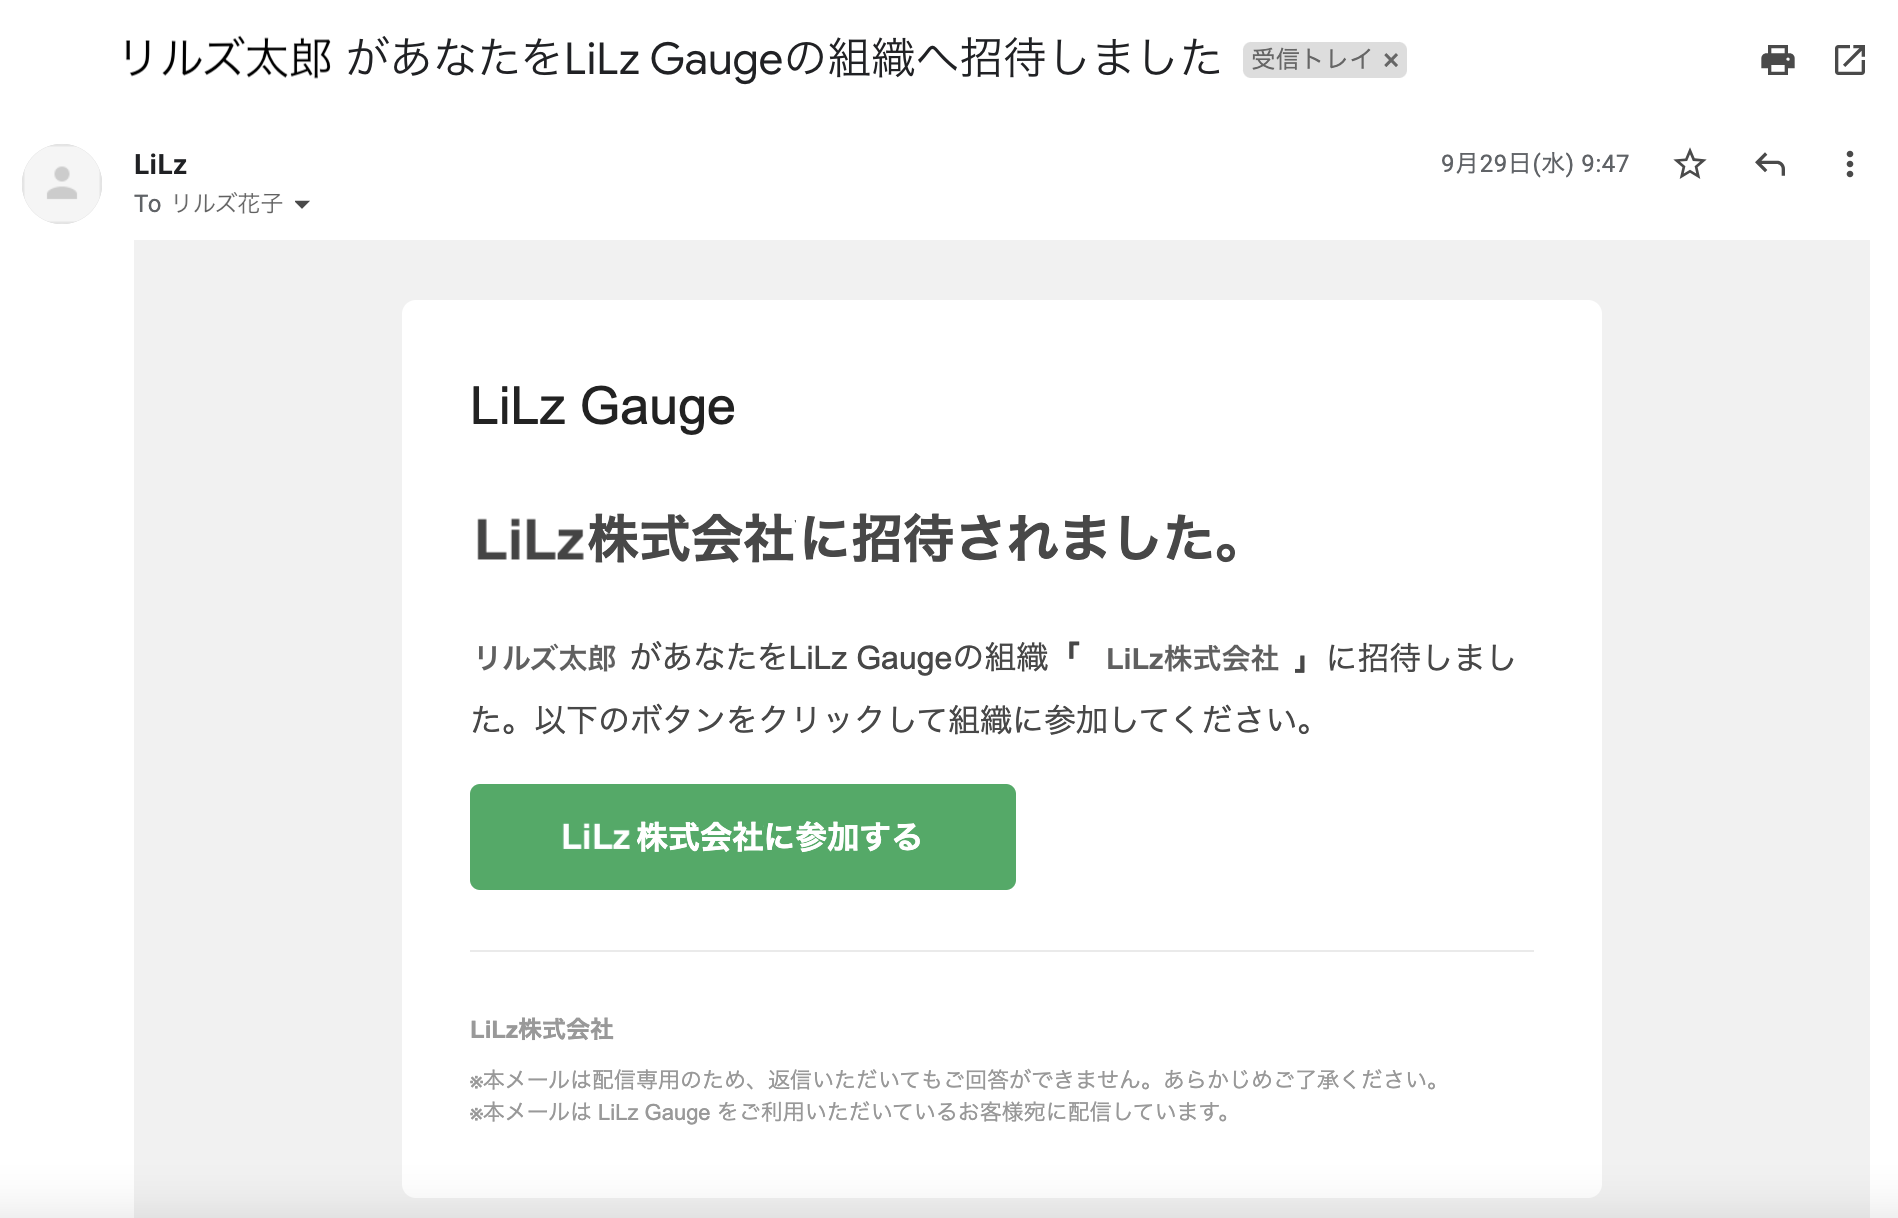 lg-user-invite-mail.png